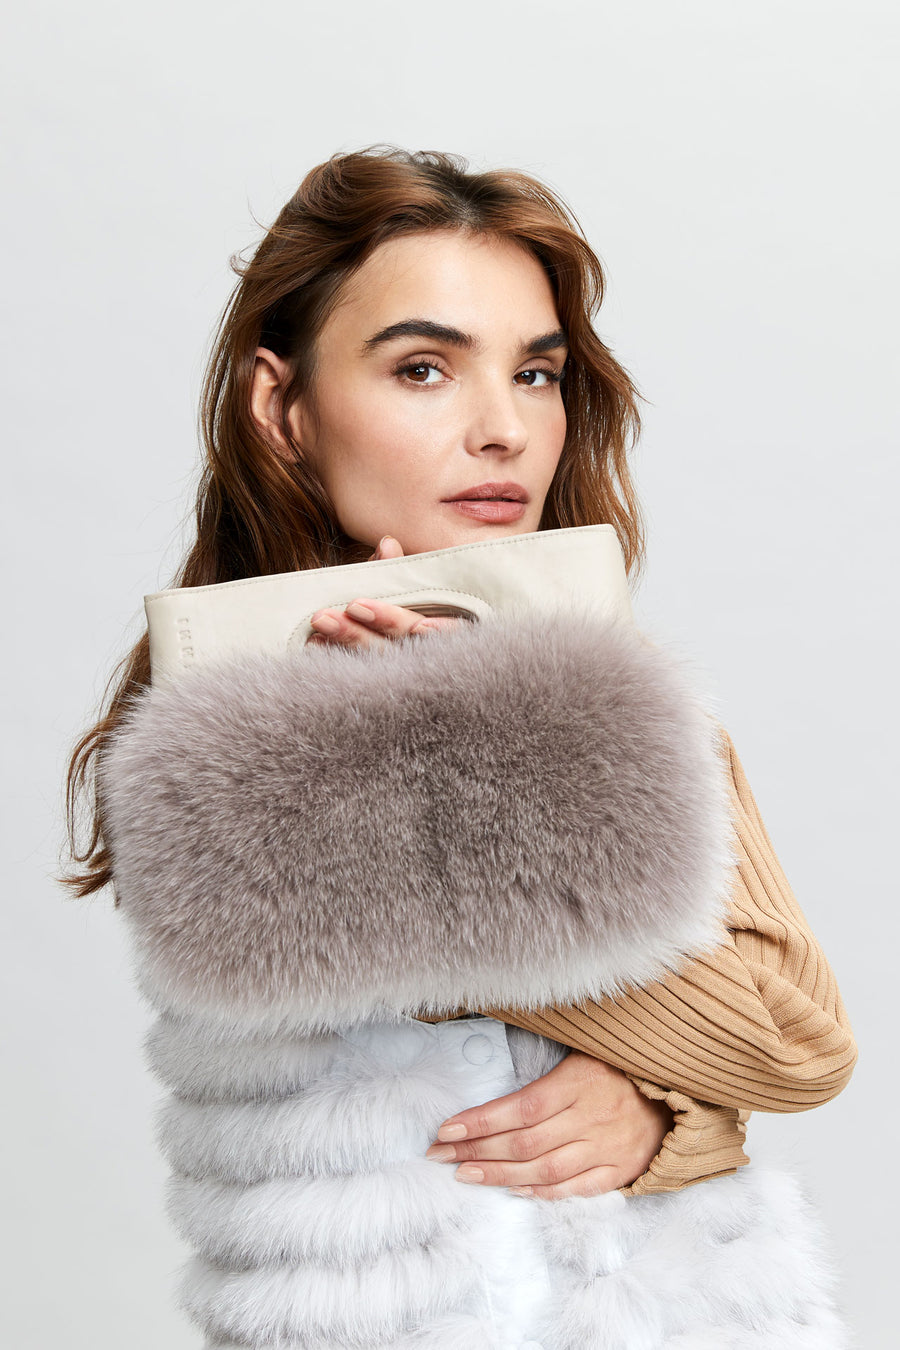 Lady modelling with a Fur bag